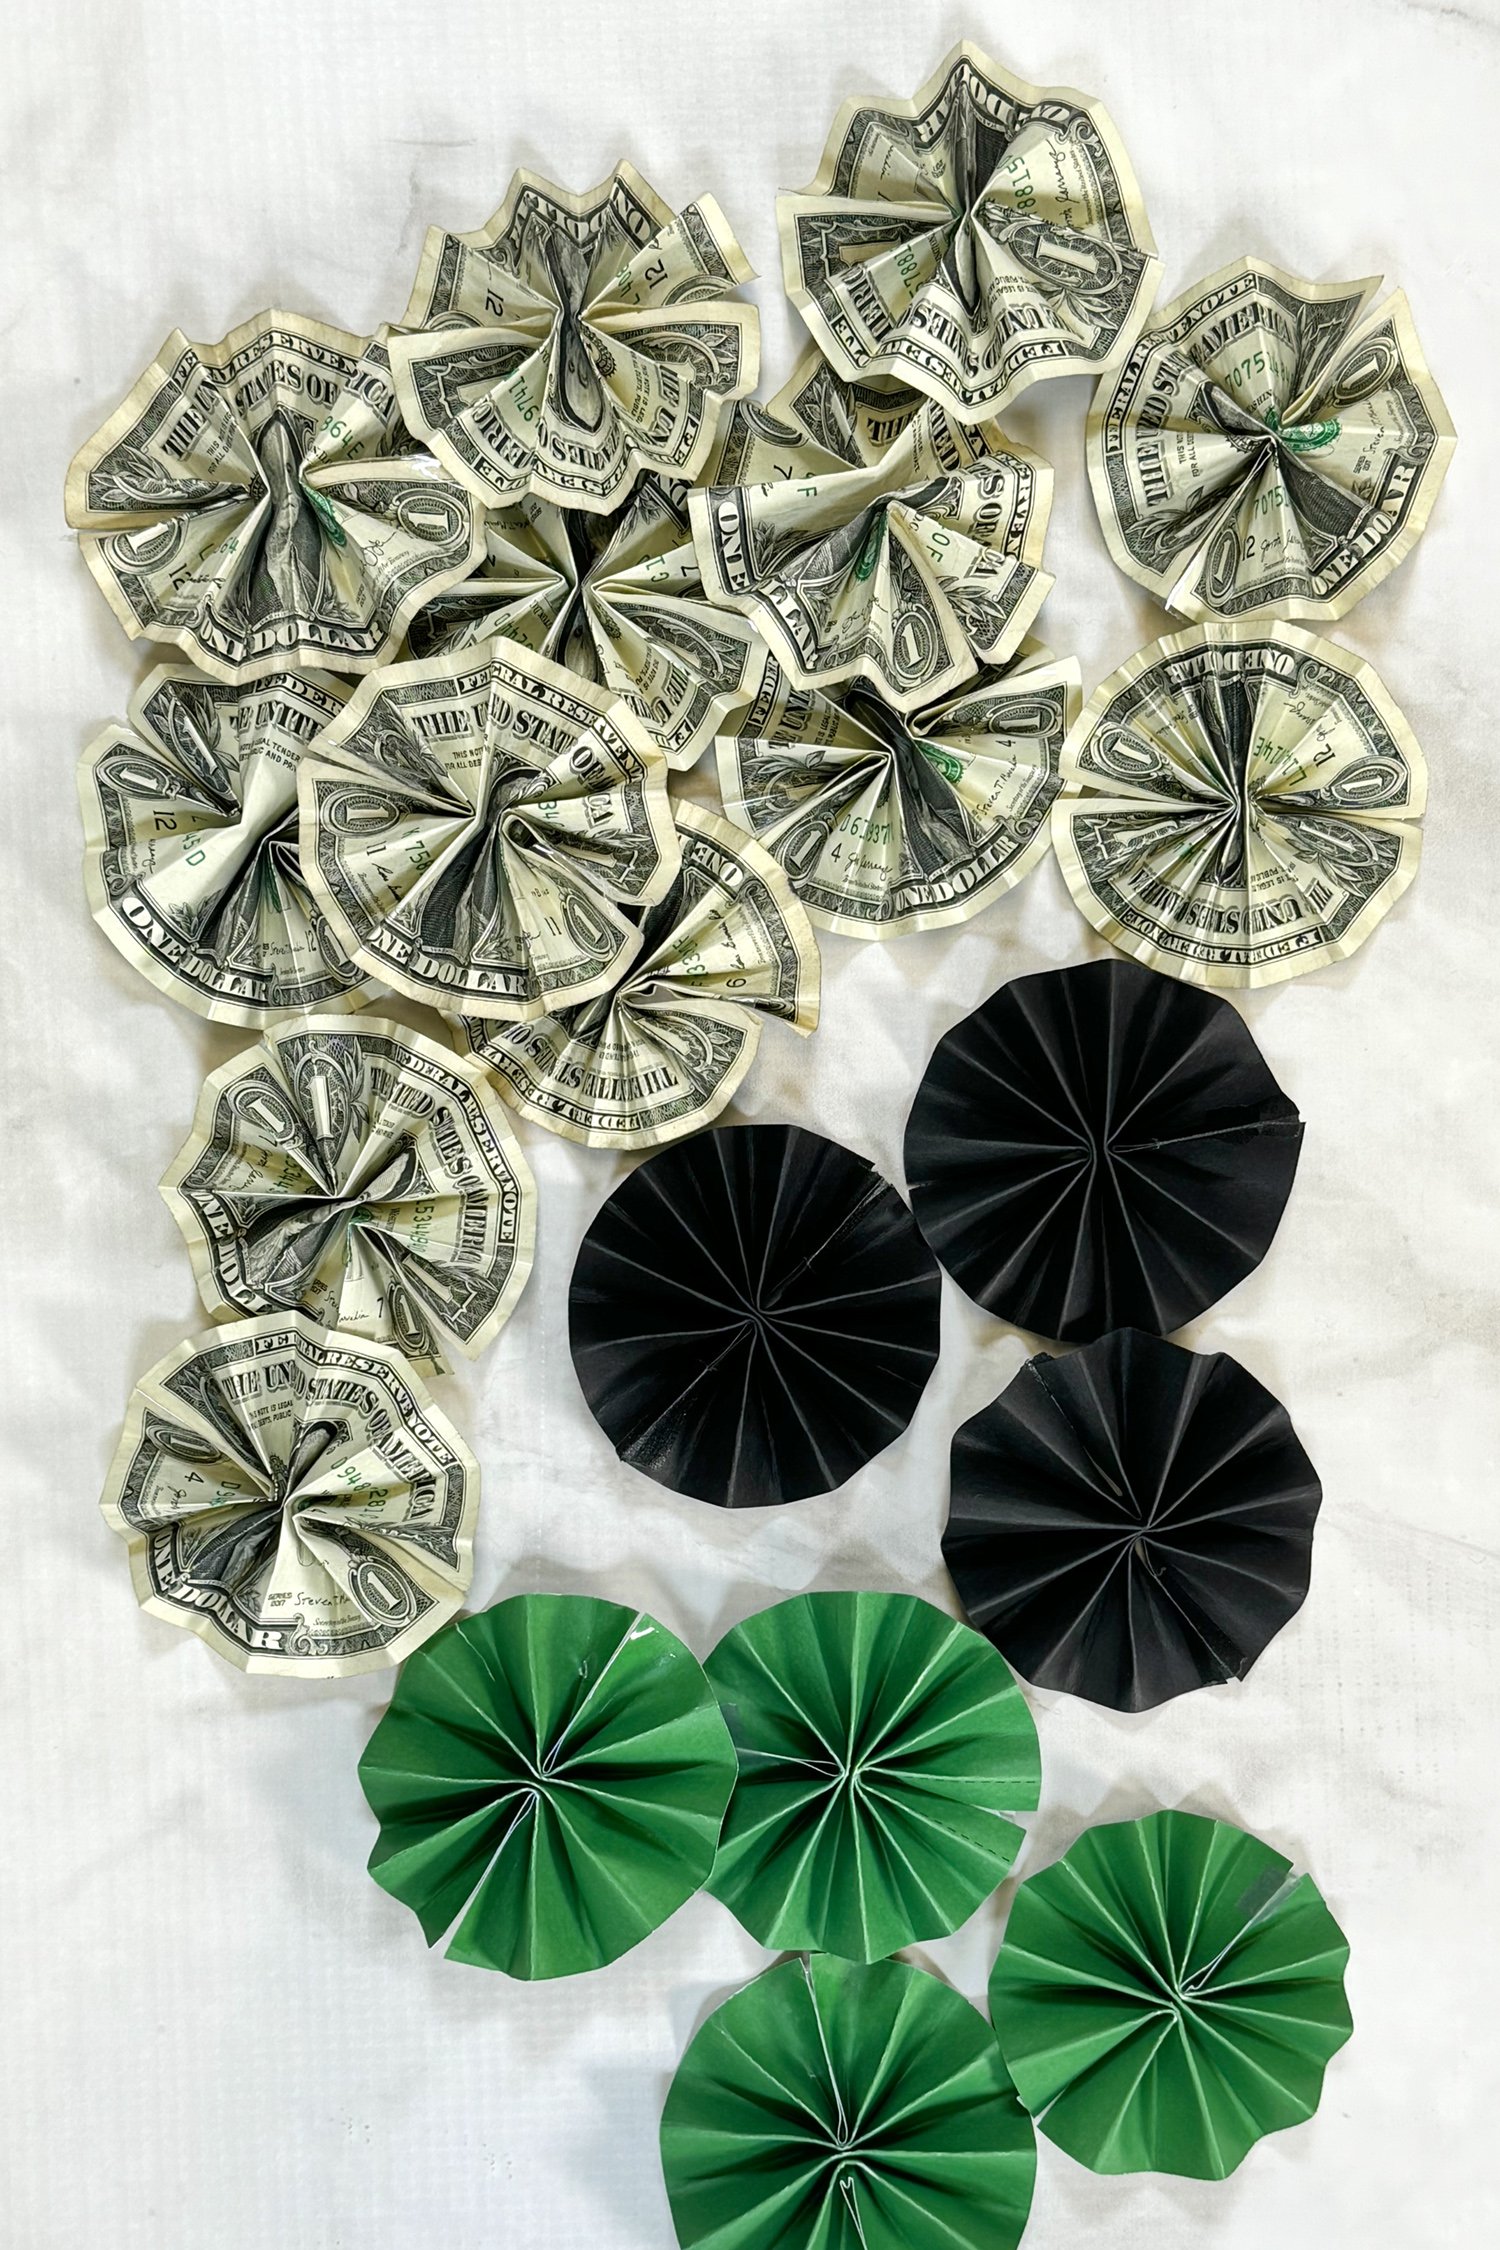 green and black paper rosettes and dollar bill rosettes on grey marble background